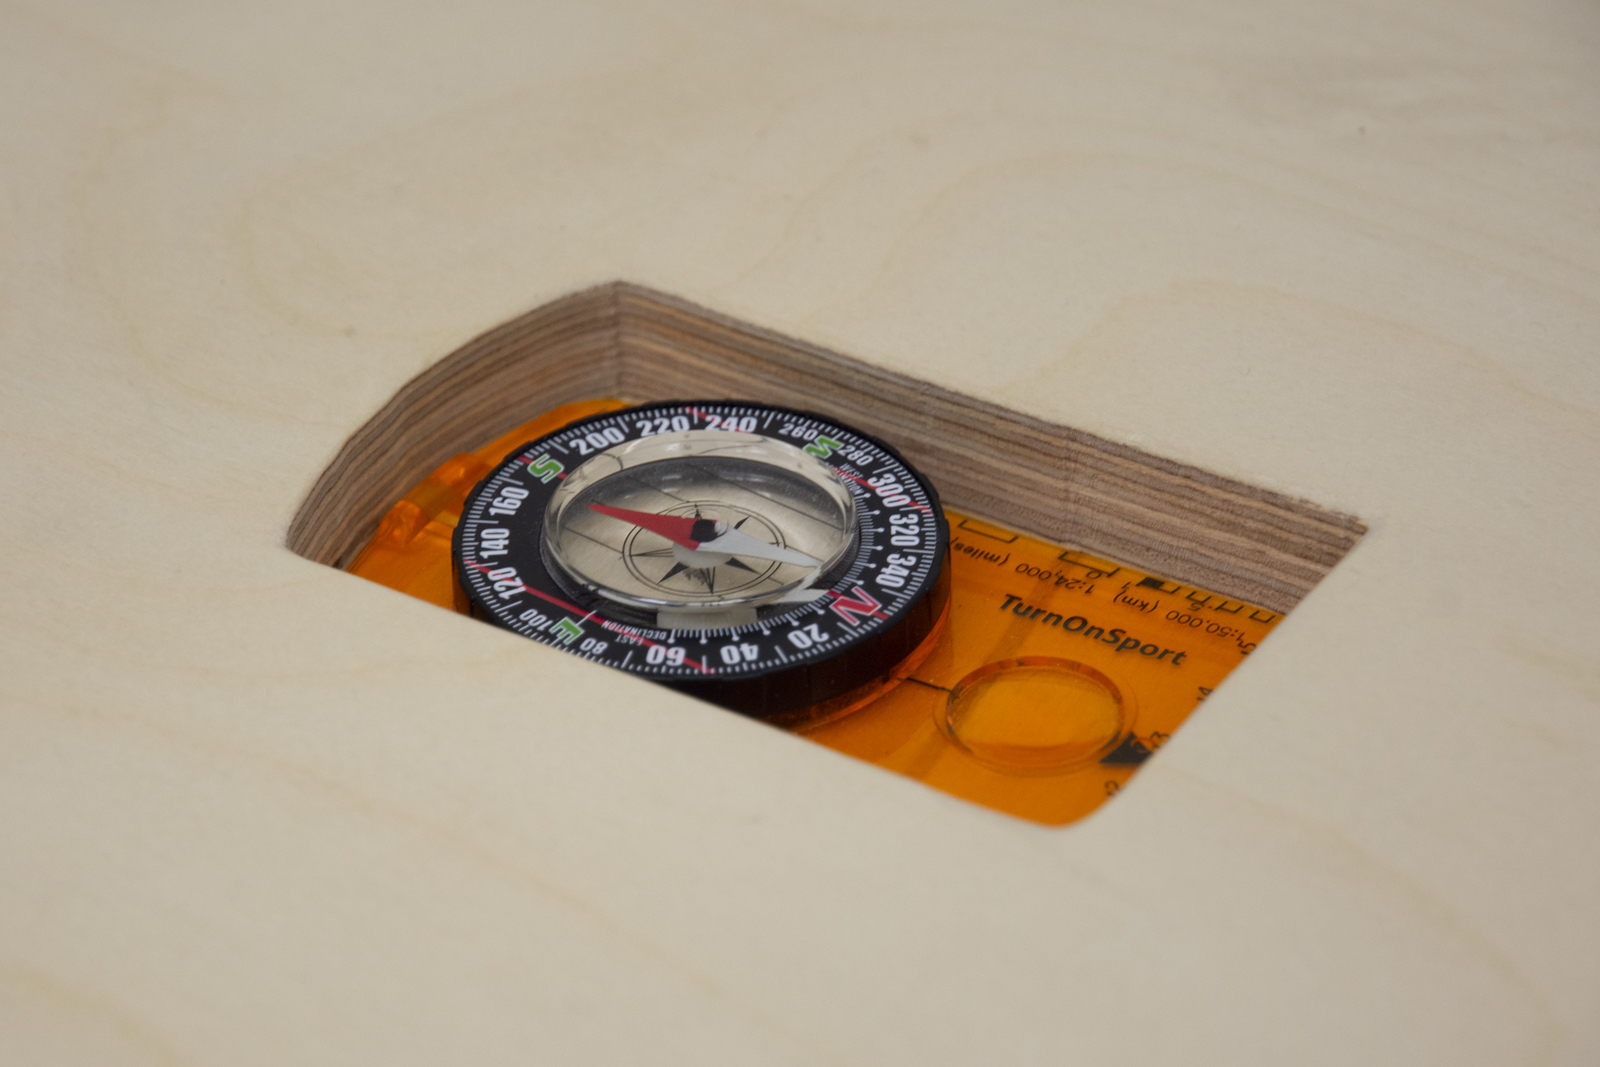 A close-up image of an orange orienteering compass that has been placed within a compartment cut specifically to its size and shape.